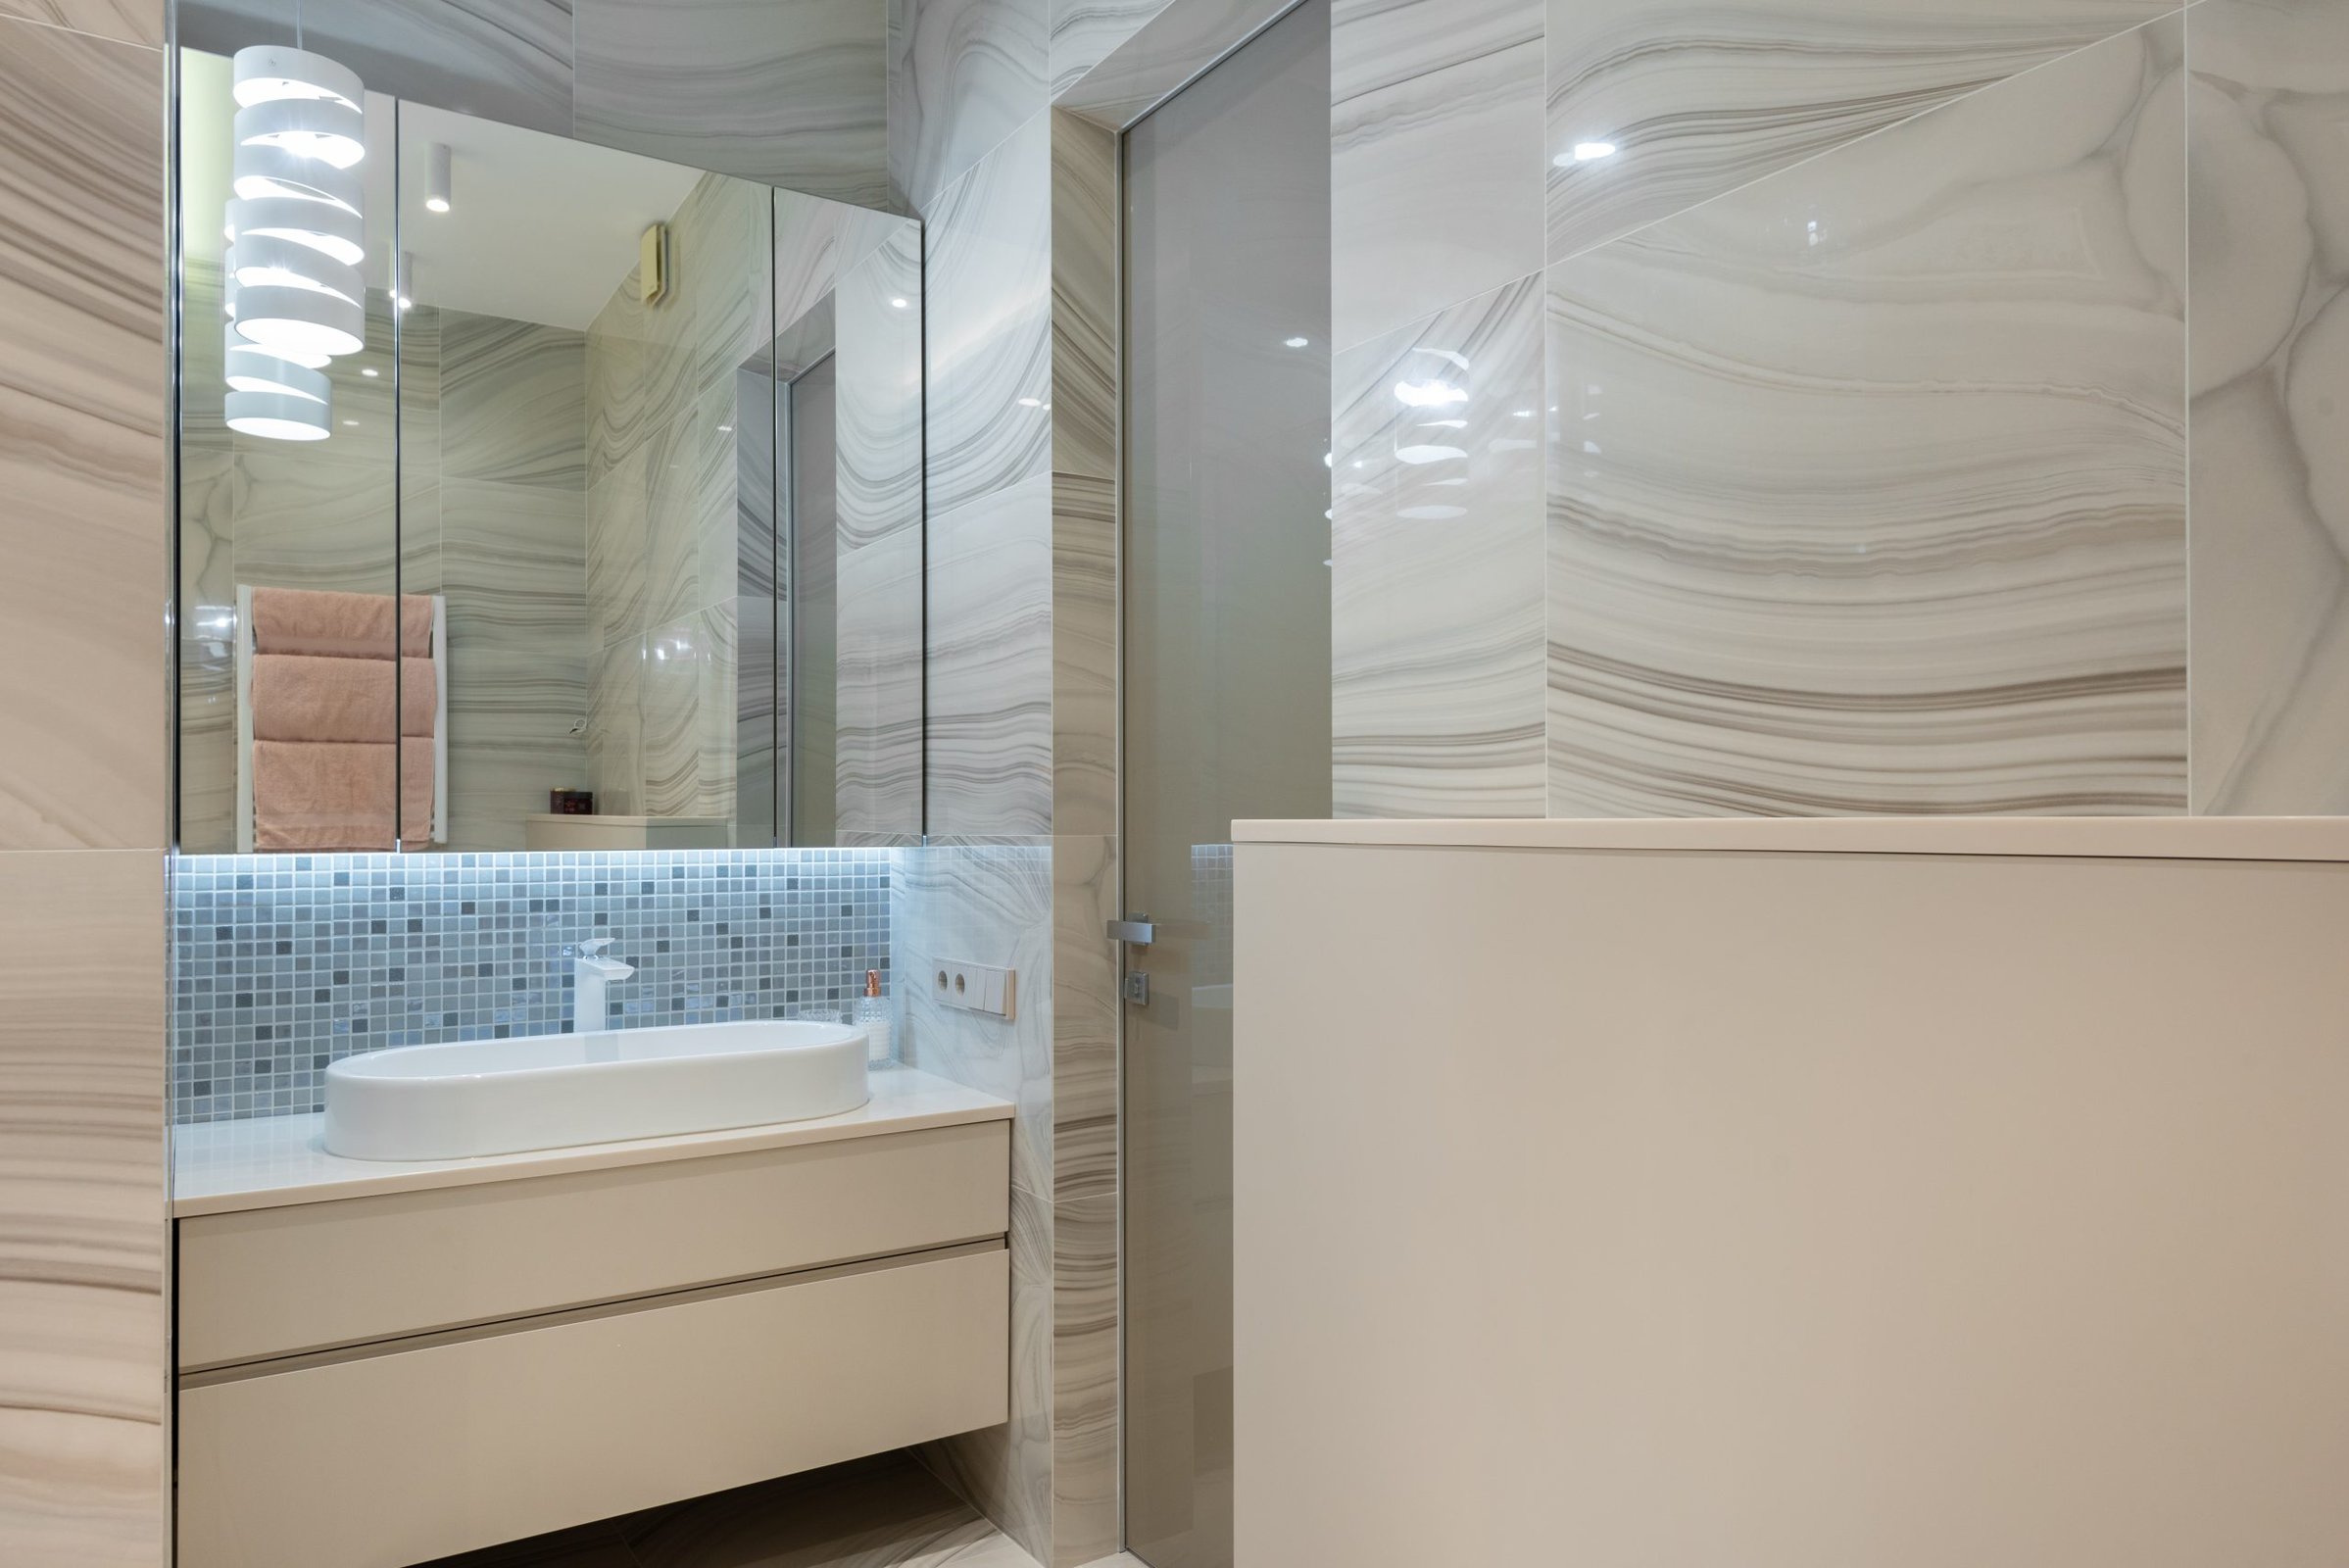  Beige and Gray Marble Bathroom Walls scaled